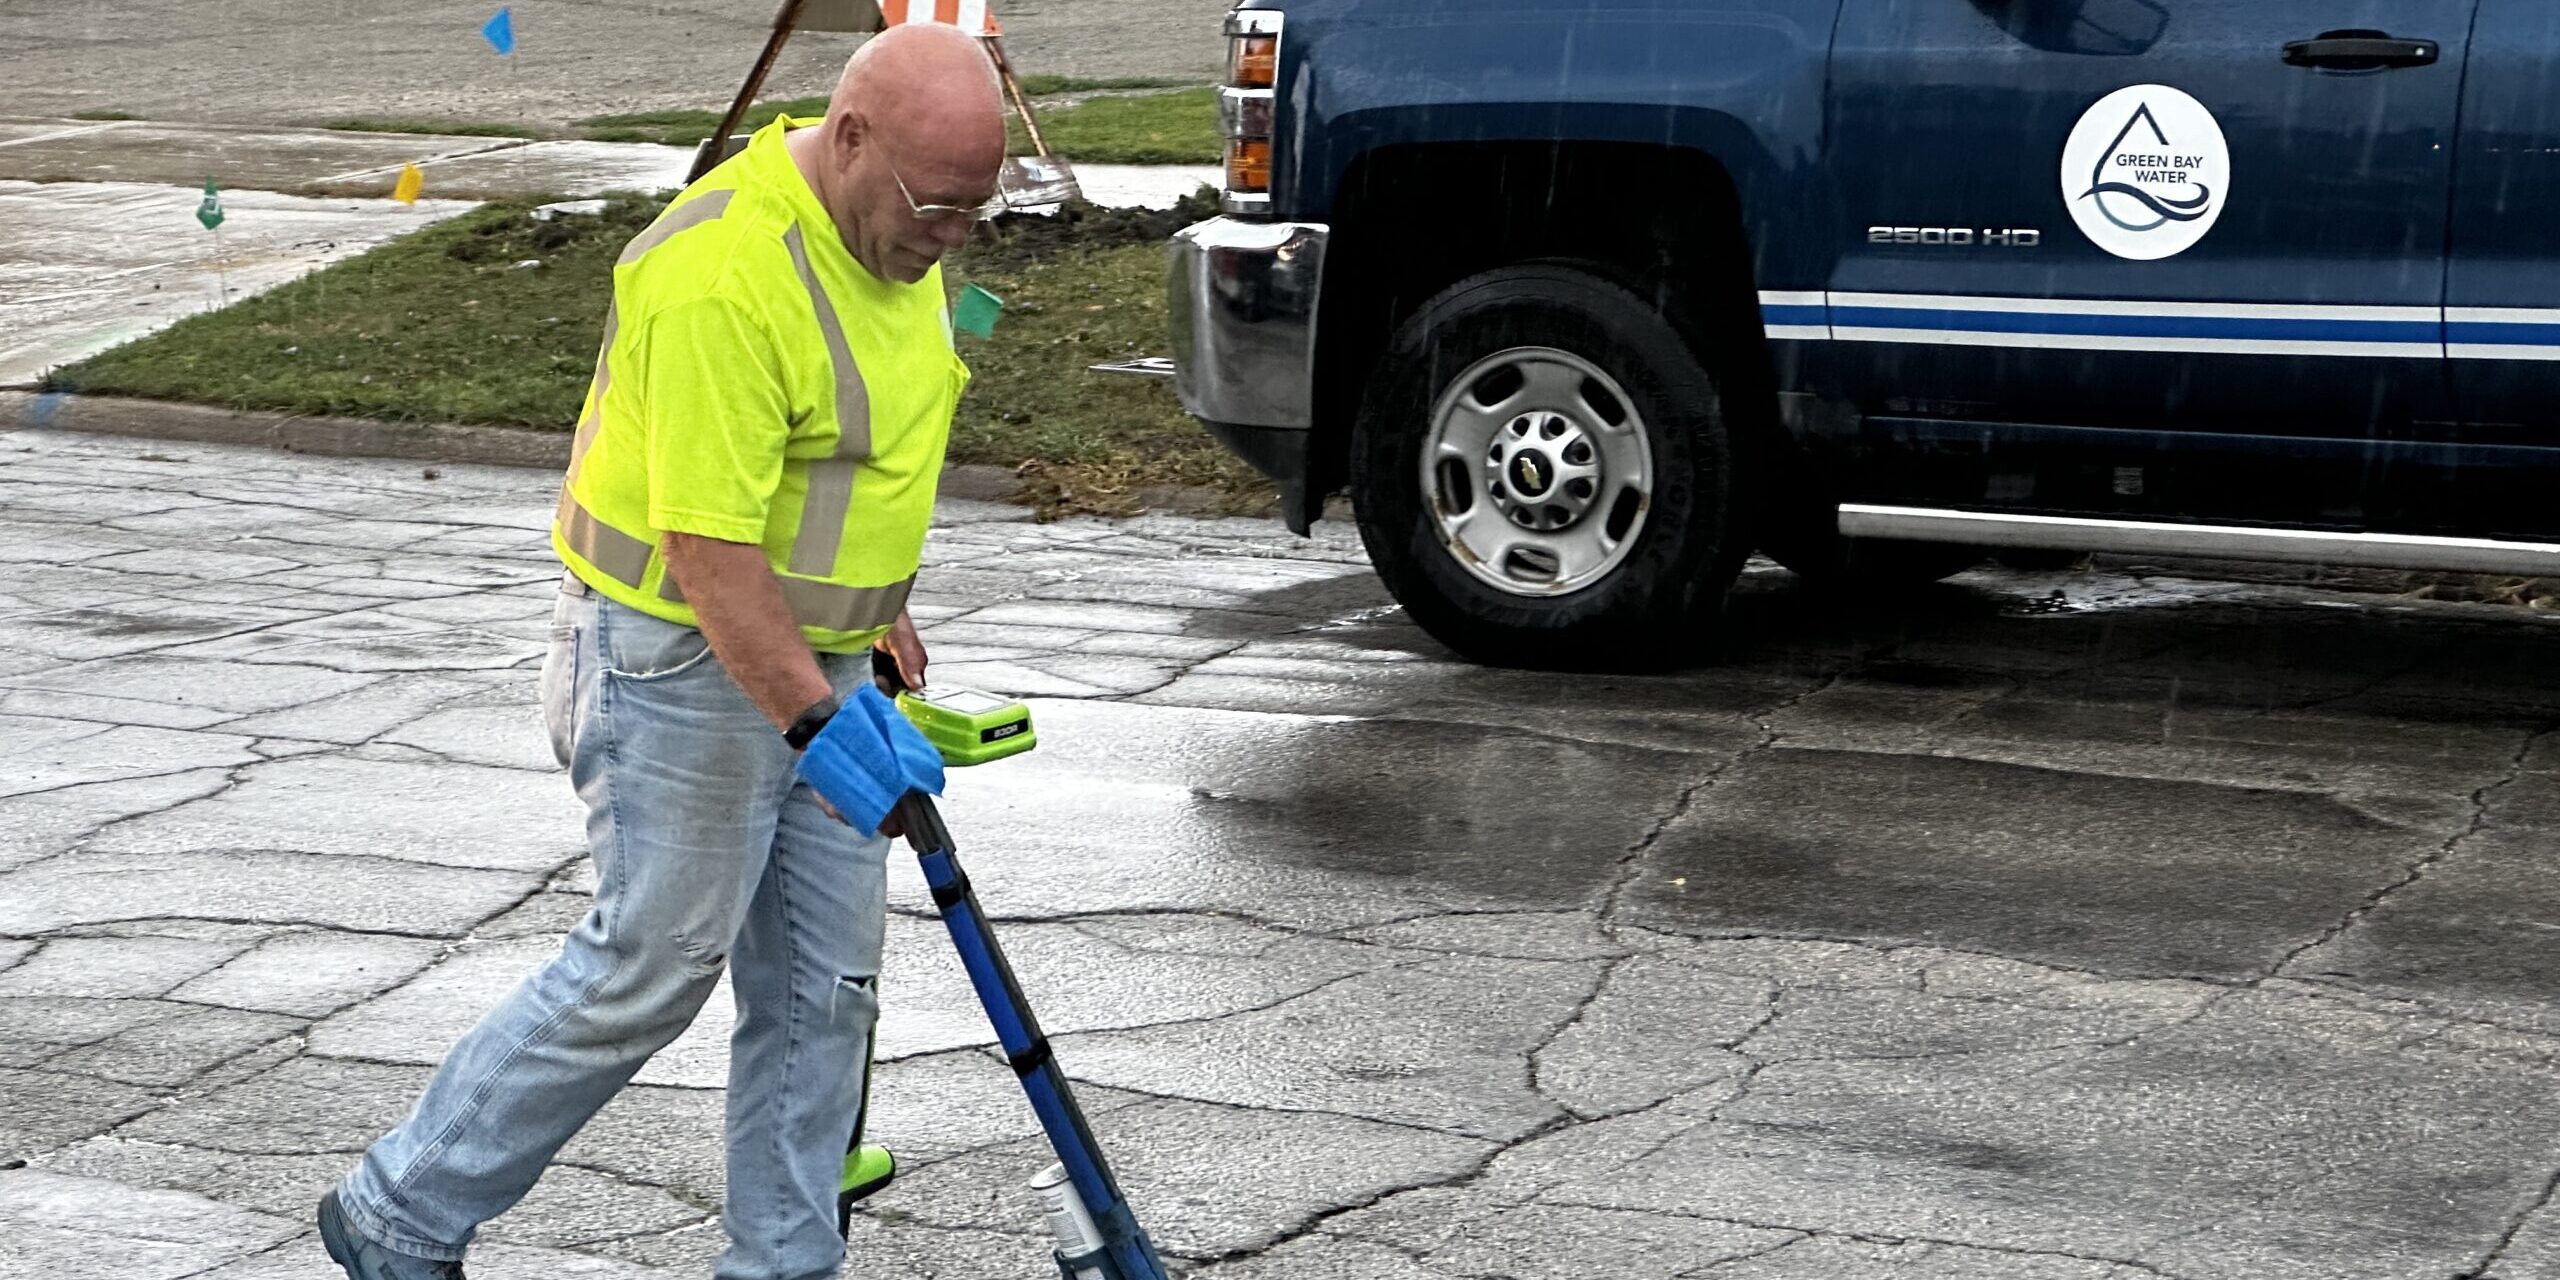 A man sprays blue paint onto a road to identify an underground water line.